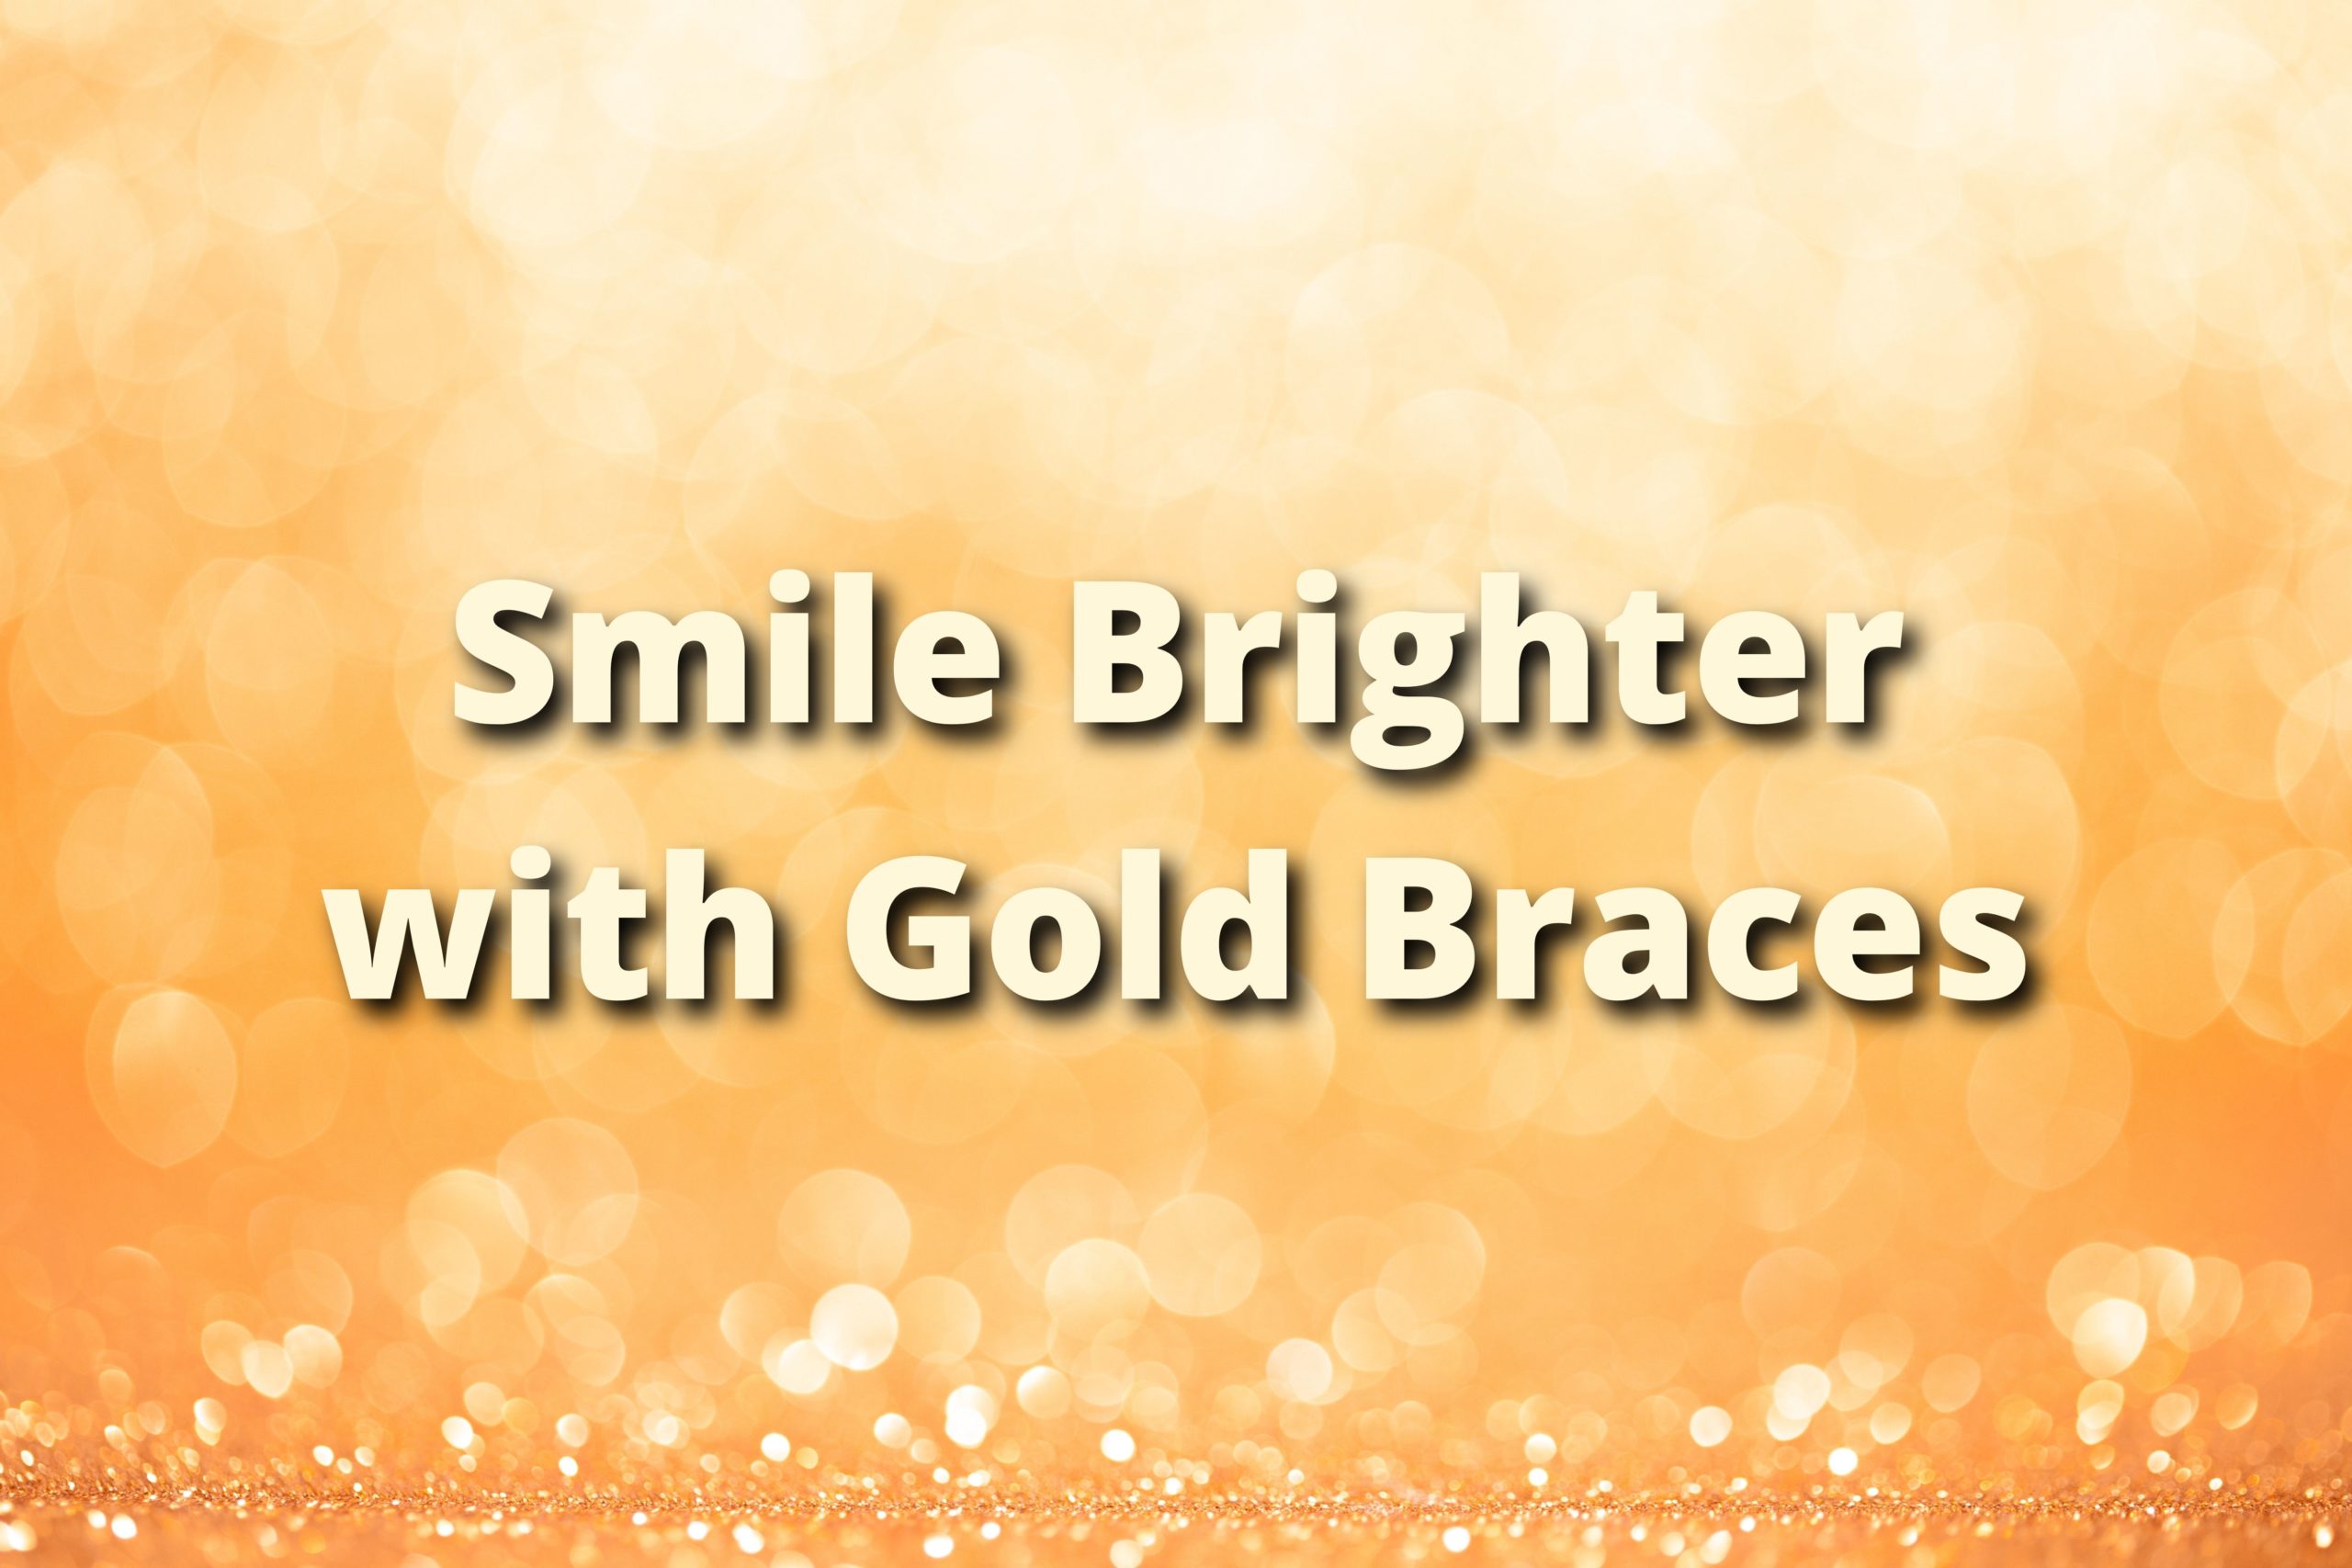 Smile Brighter with Gold Braces